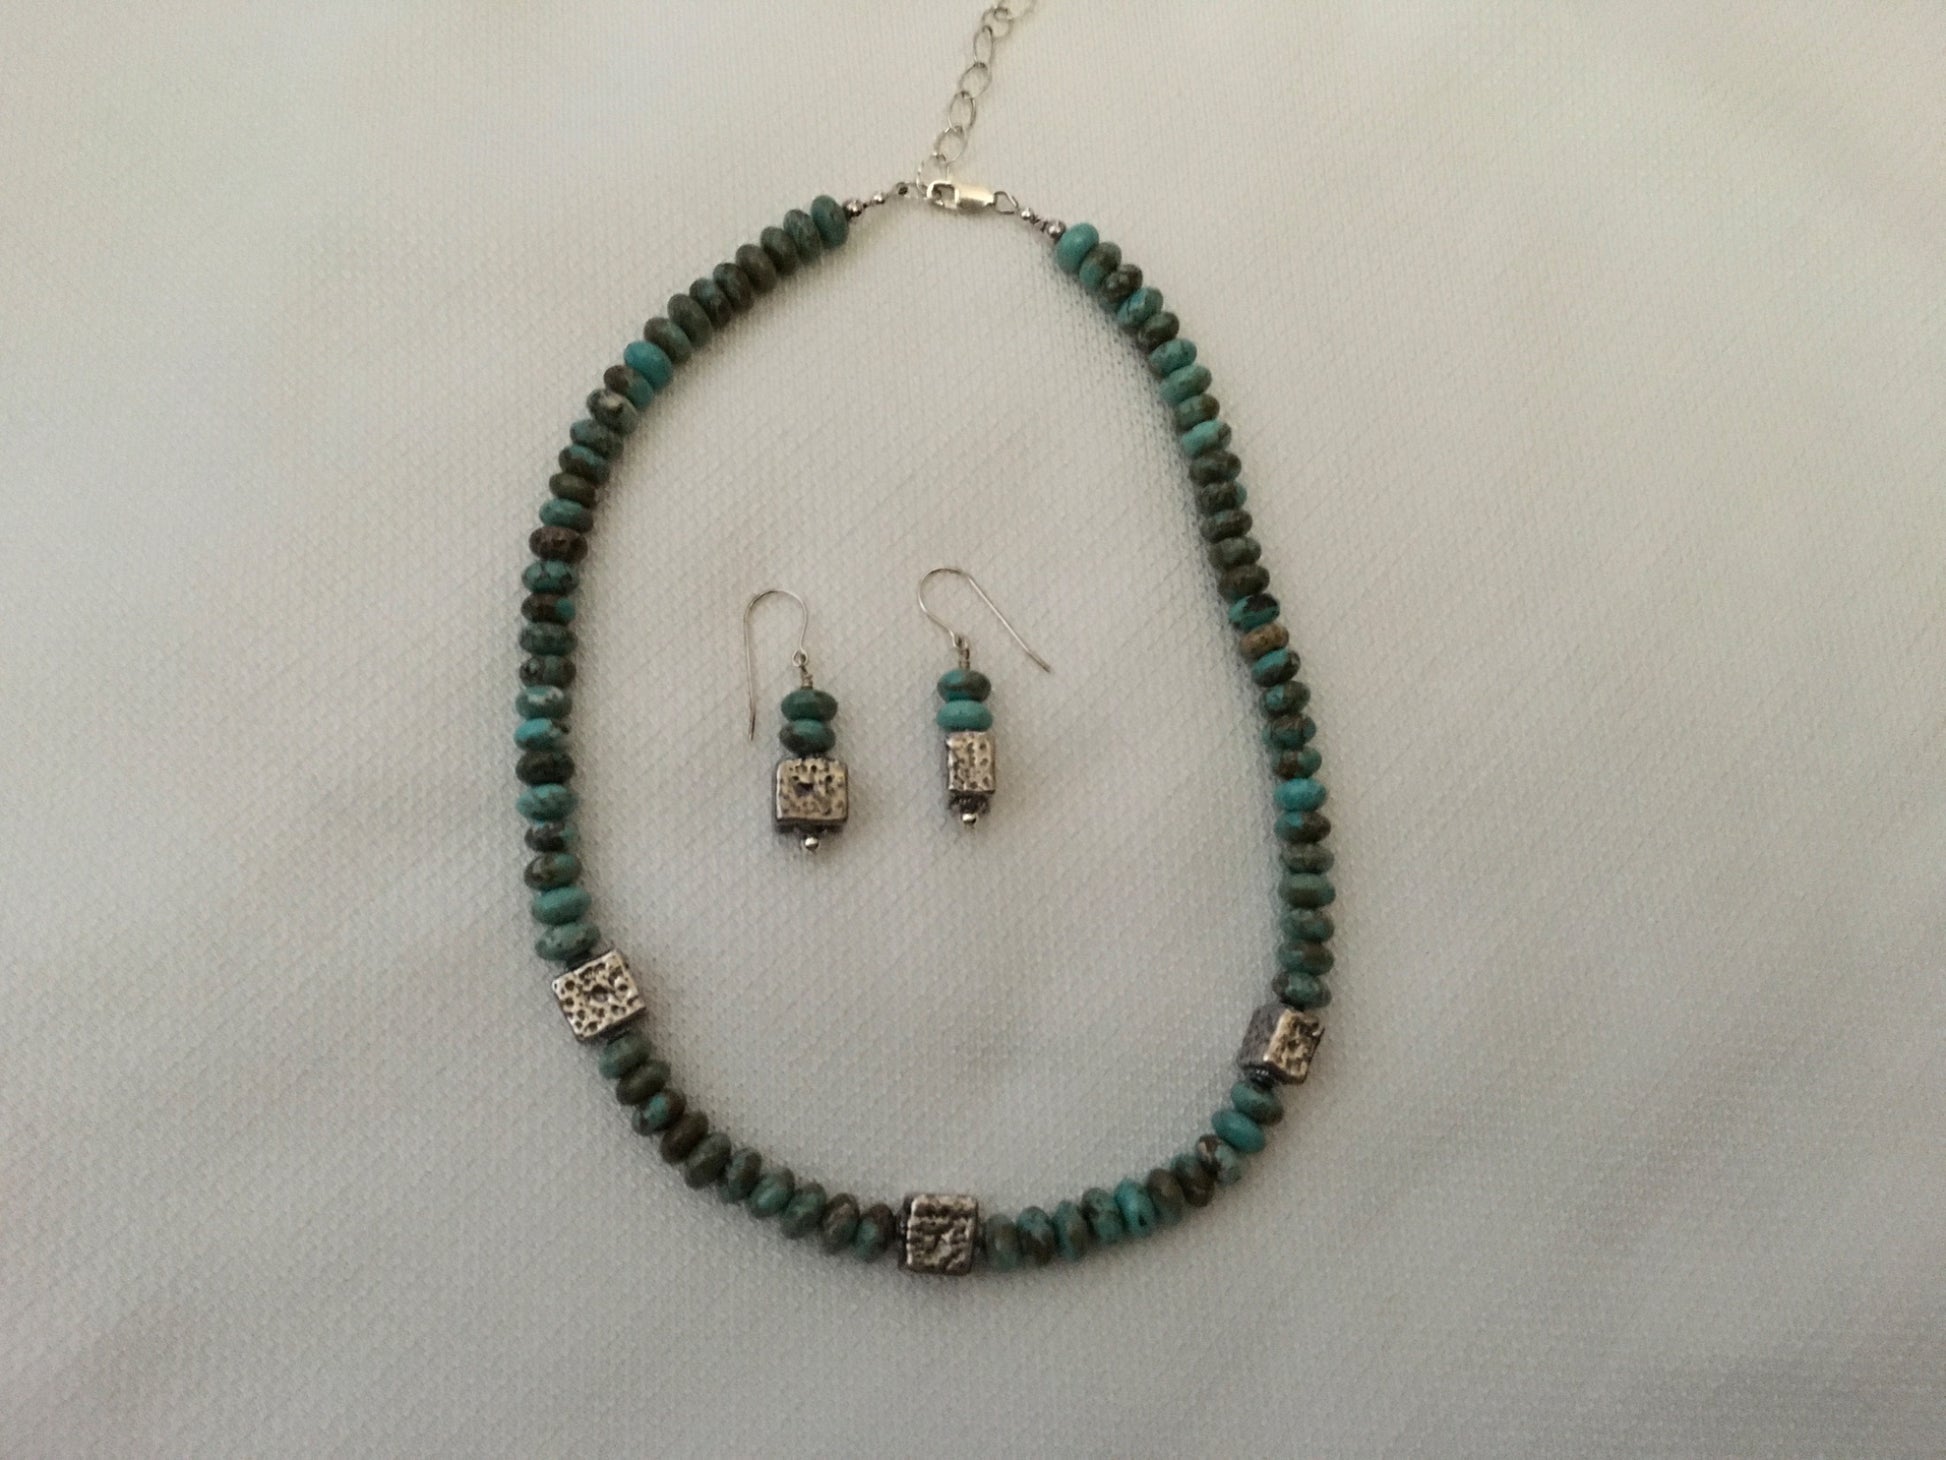 Turquoise and Sterling Silver Necklace and Earrings Set - 2